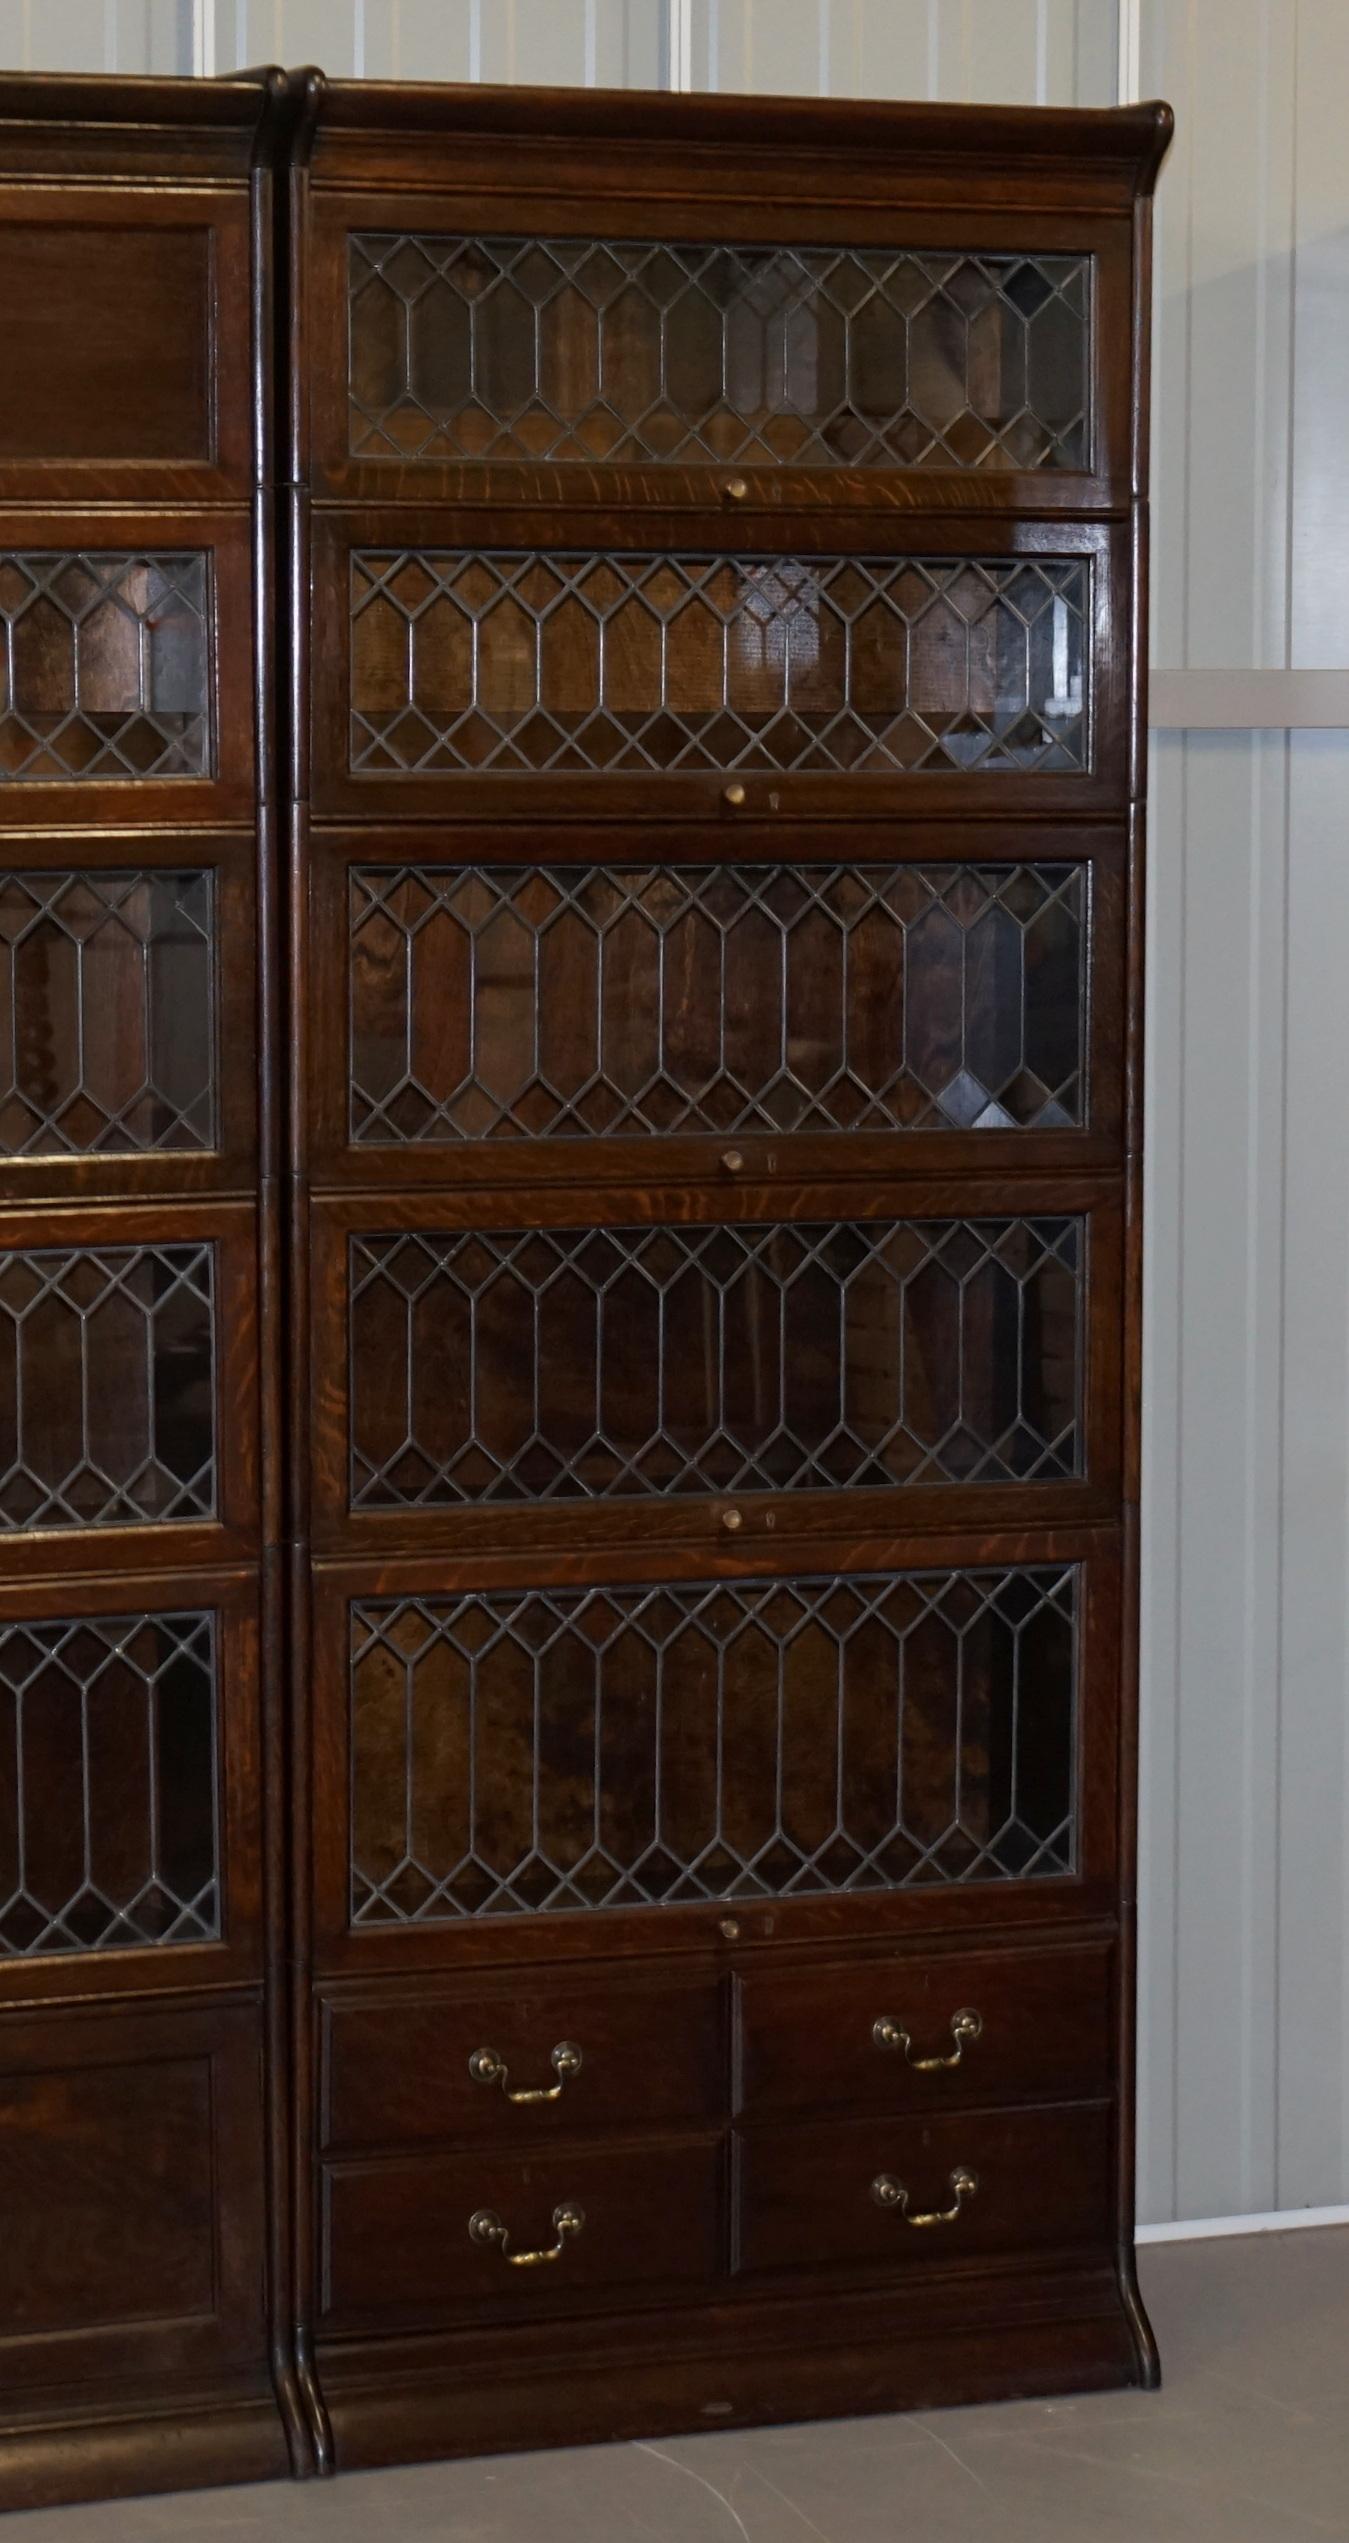 Glass Angus Scotland & England Suite of 3 Large Gunn Library Legal Stacking Bookcases